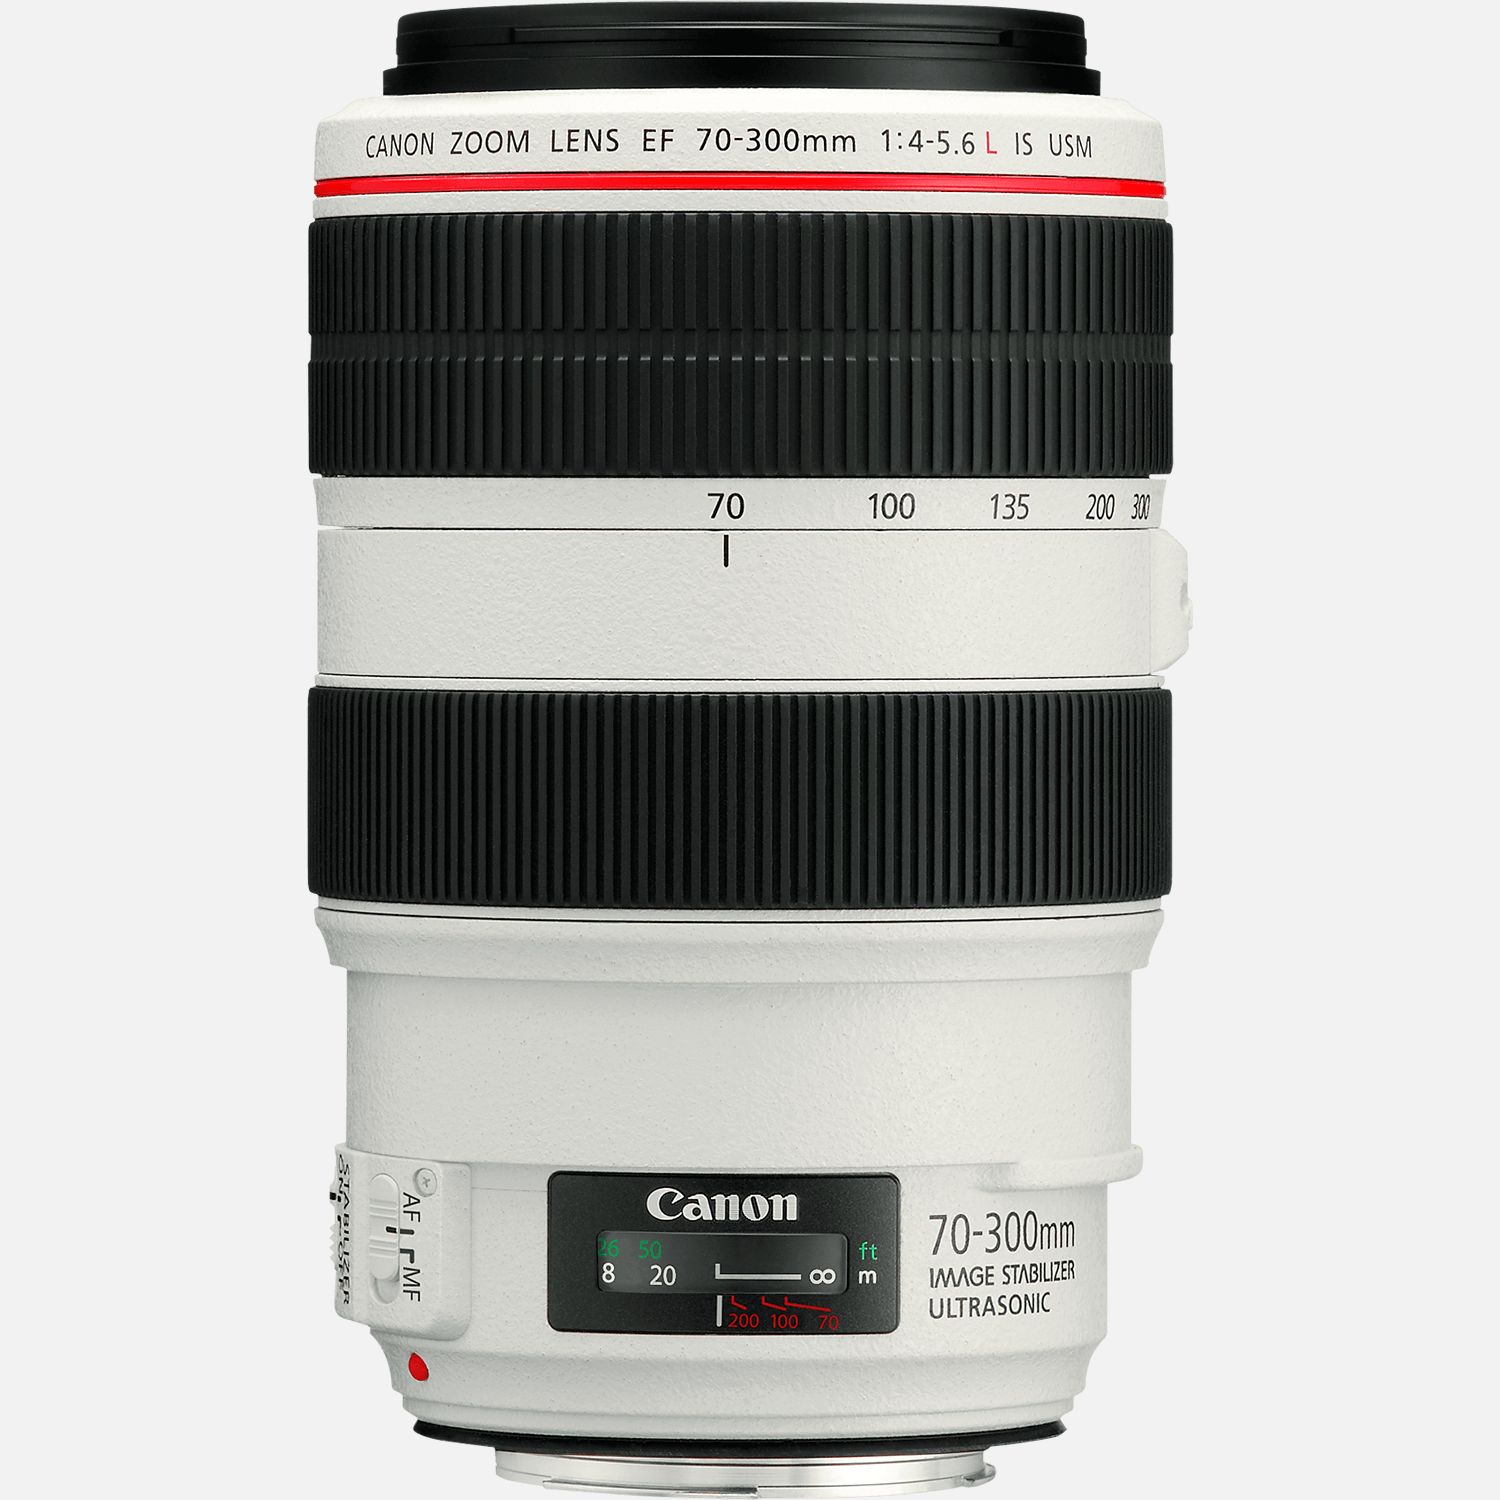 Buy Canon EF 70-300mm f/4-5.6L IS USM Lens in Discontinued — Canon